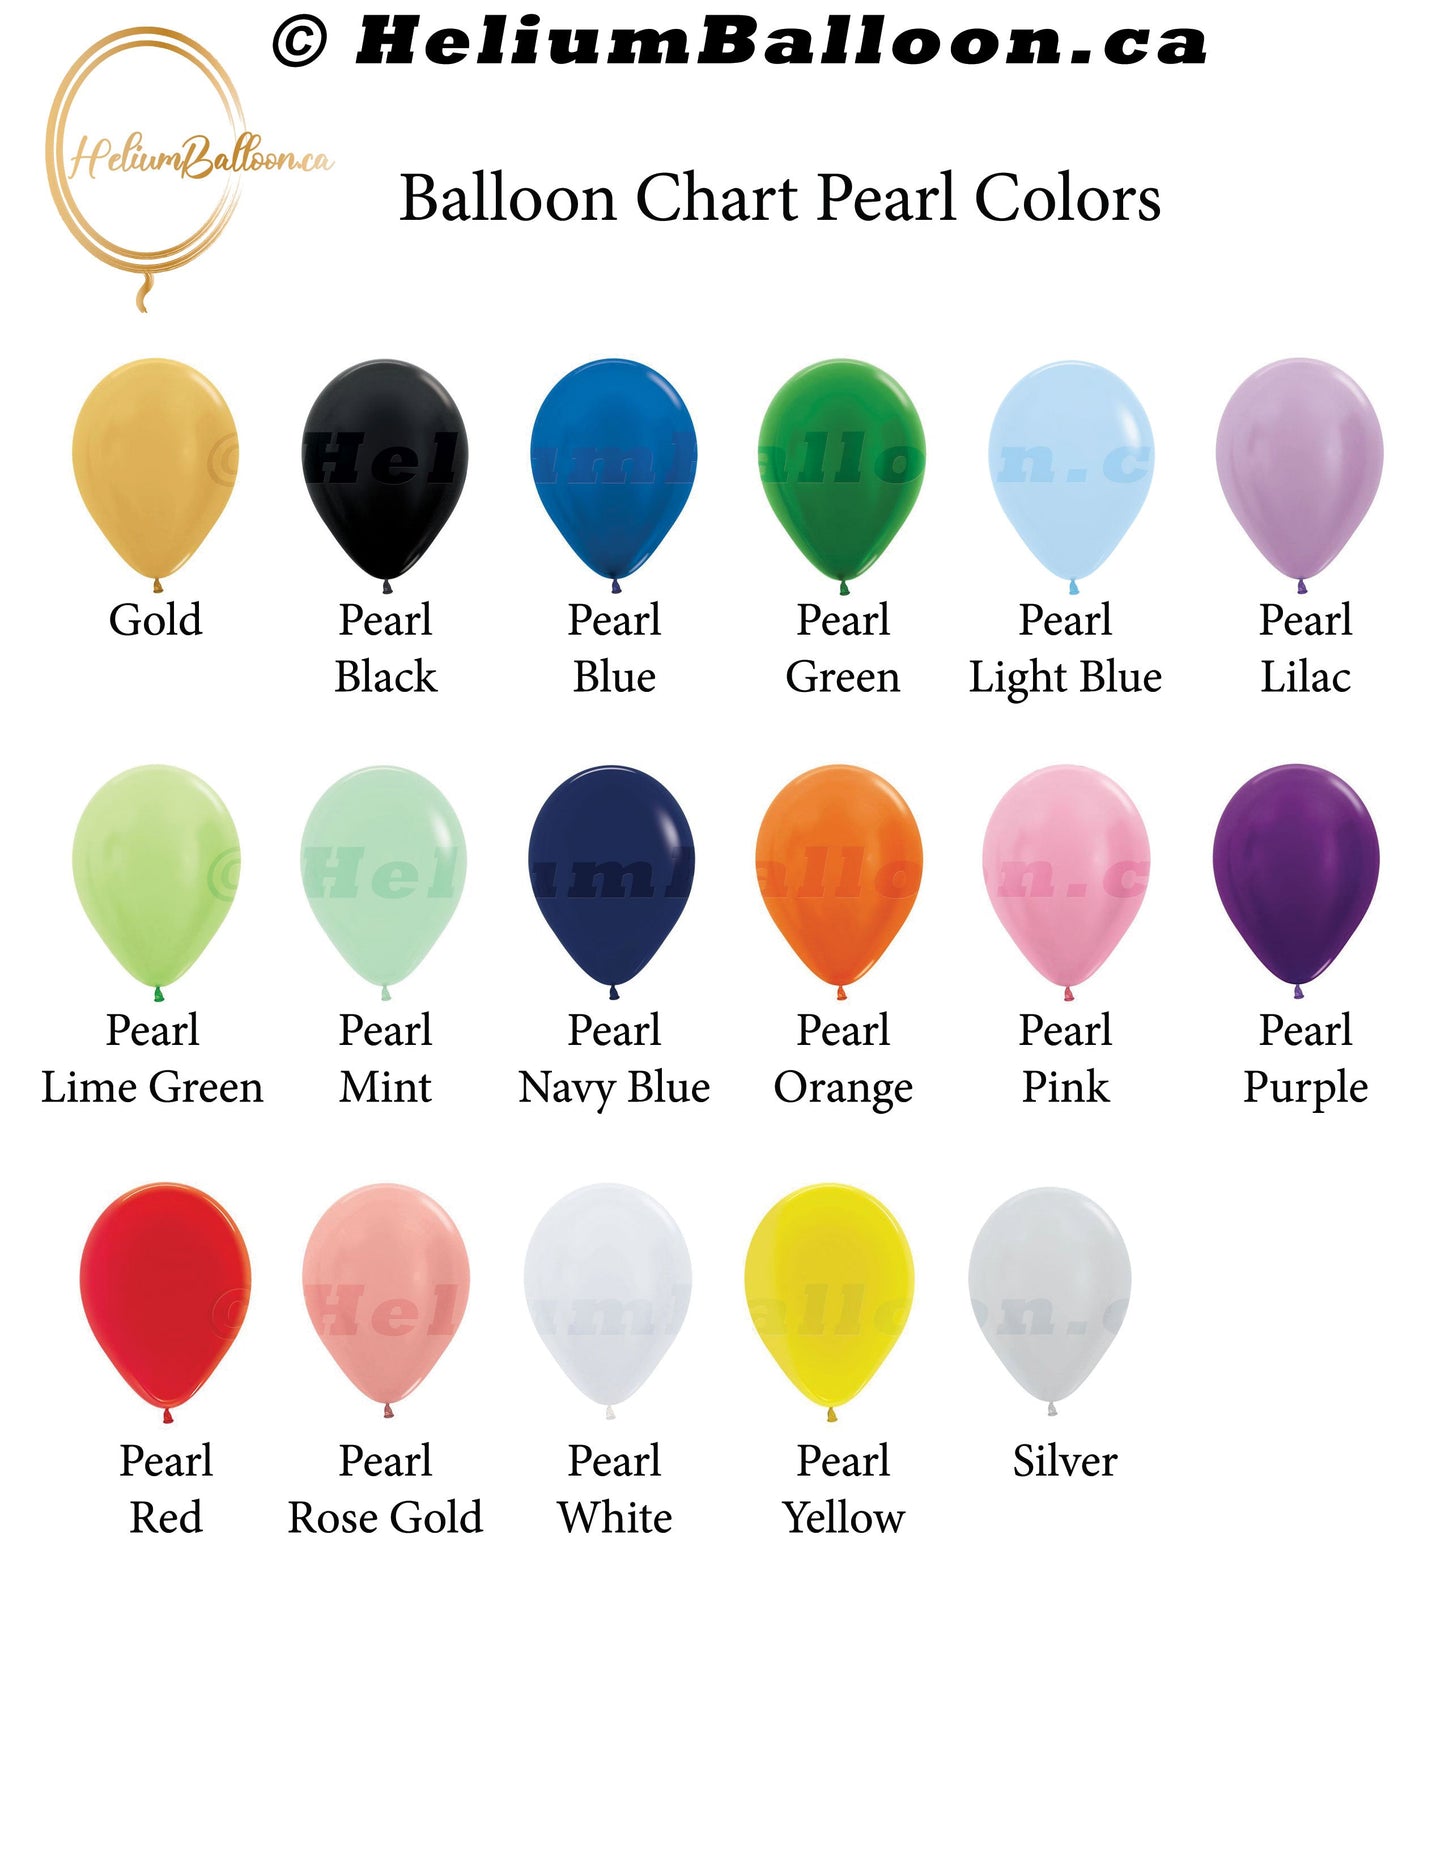 Set of Individual Latex Pearl Ceiling Balloons 11" - FLOATING TIME 12 or 48 HOURS - ( Colors Available )